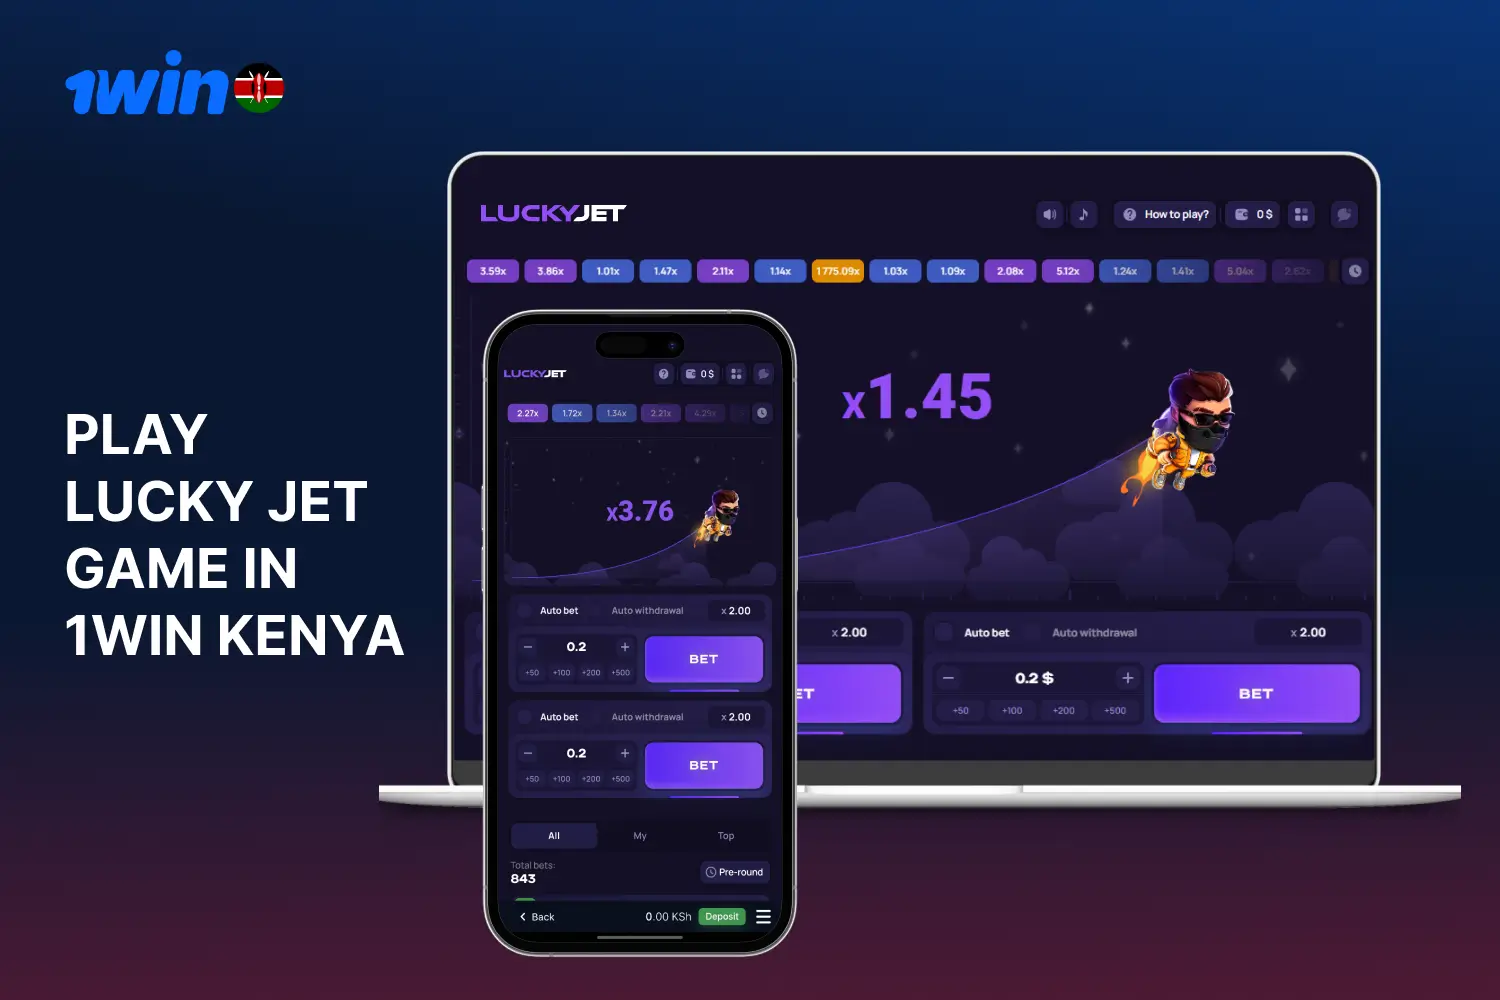 Players from Kenya can play the popular online game lucky jet at 1win casino